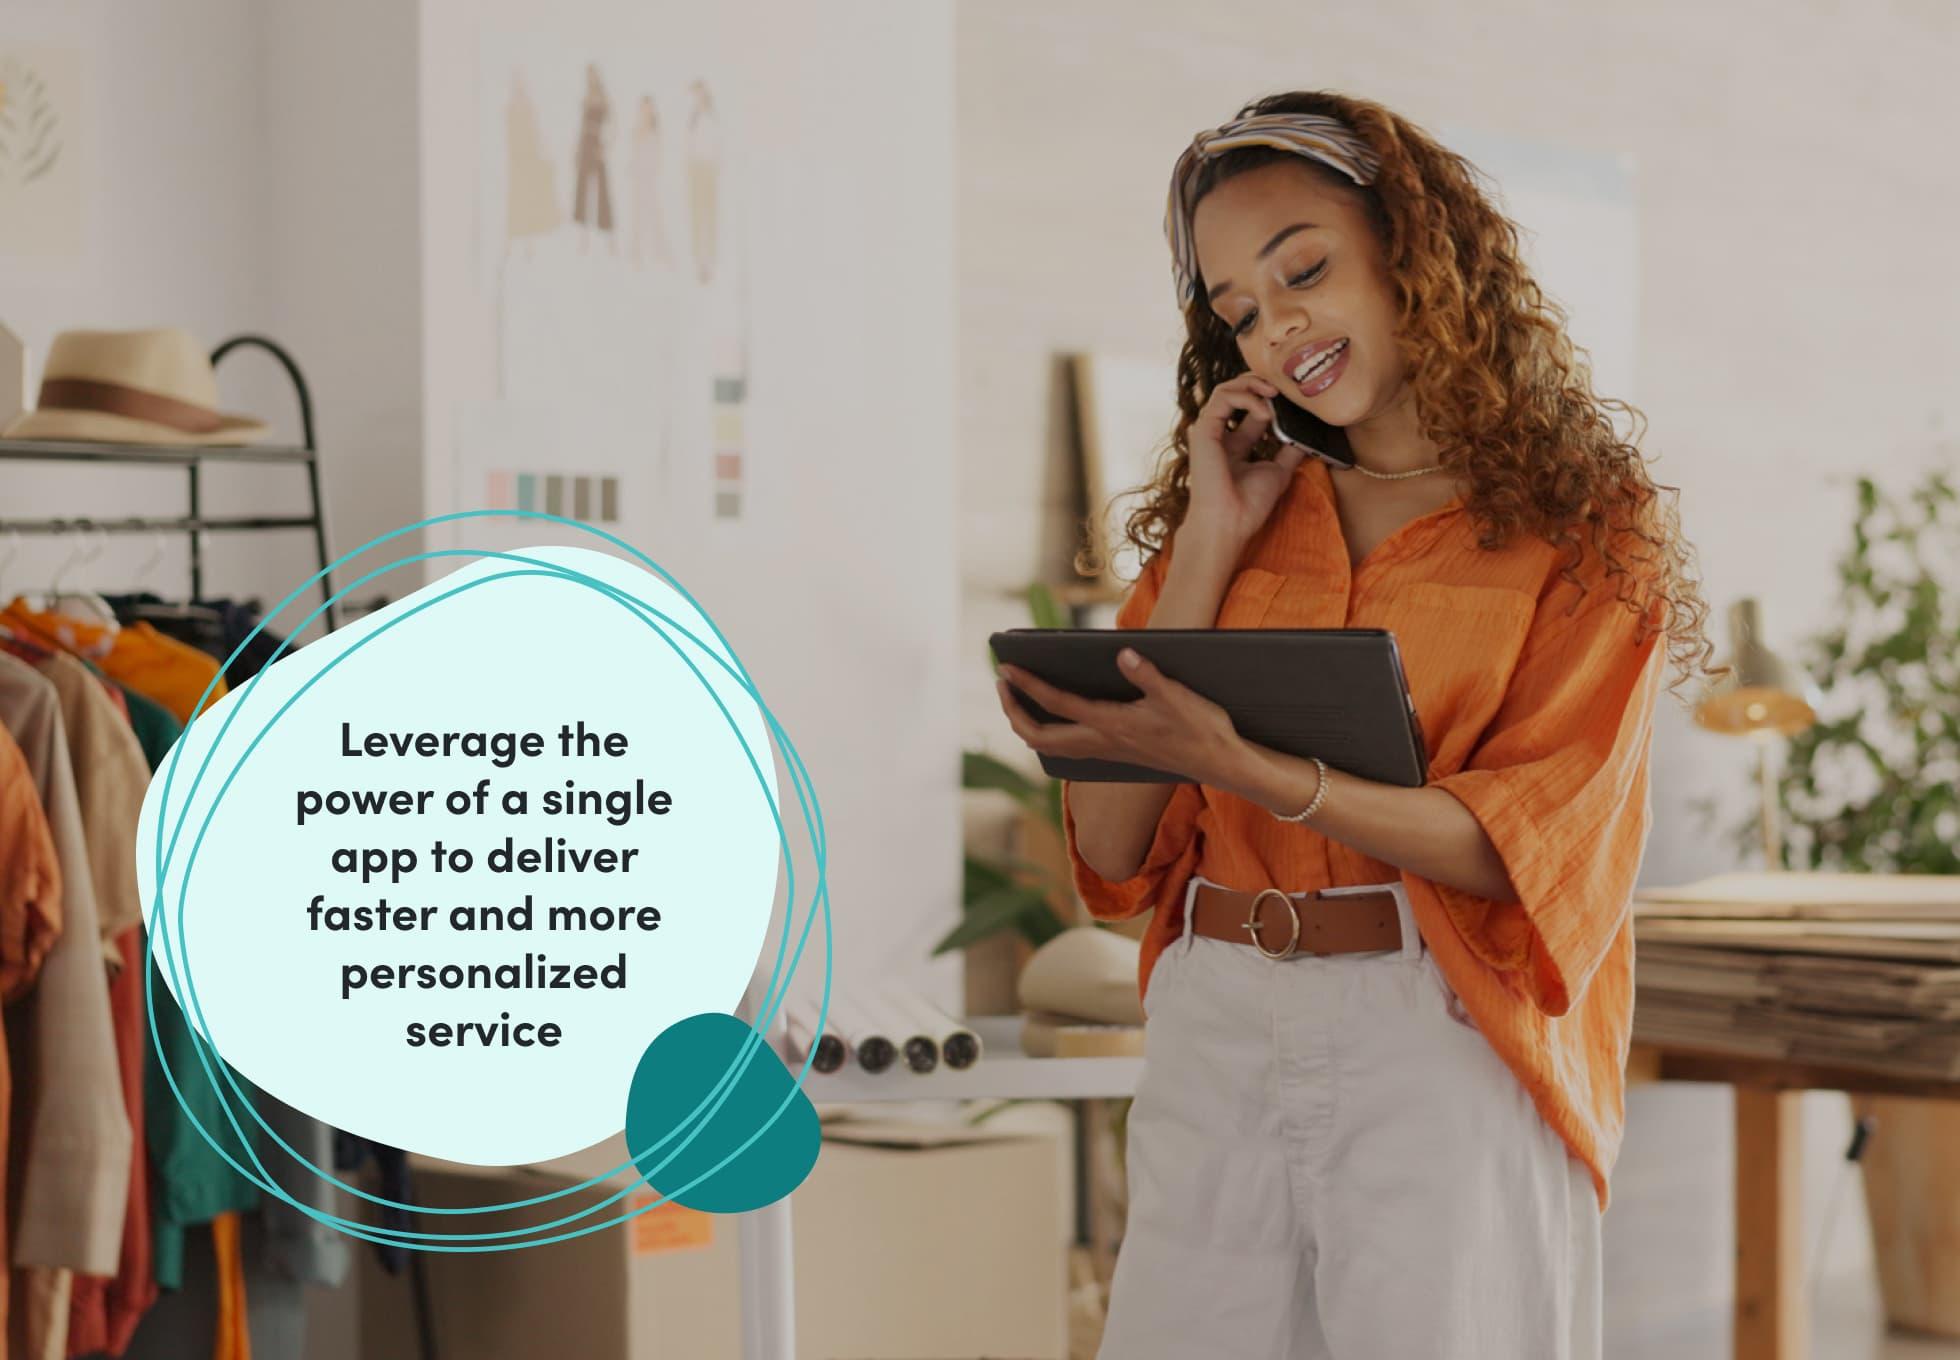 A person in a retail store is holding an iPad, while talking on a cellphone. Words imposed on the image says "Leverage the power of a single app to deliver faster and more personalized service."